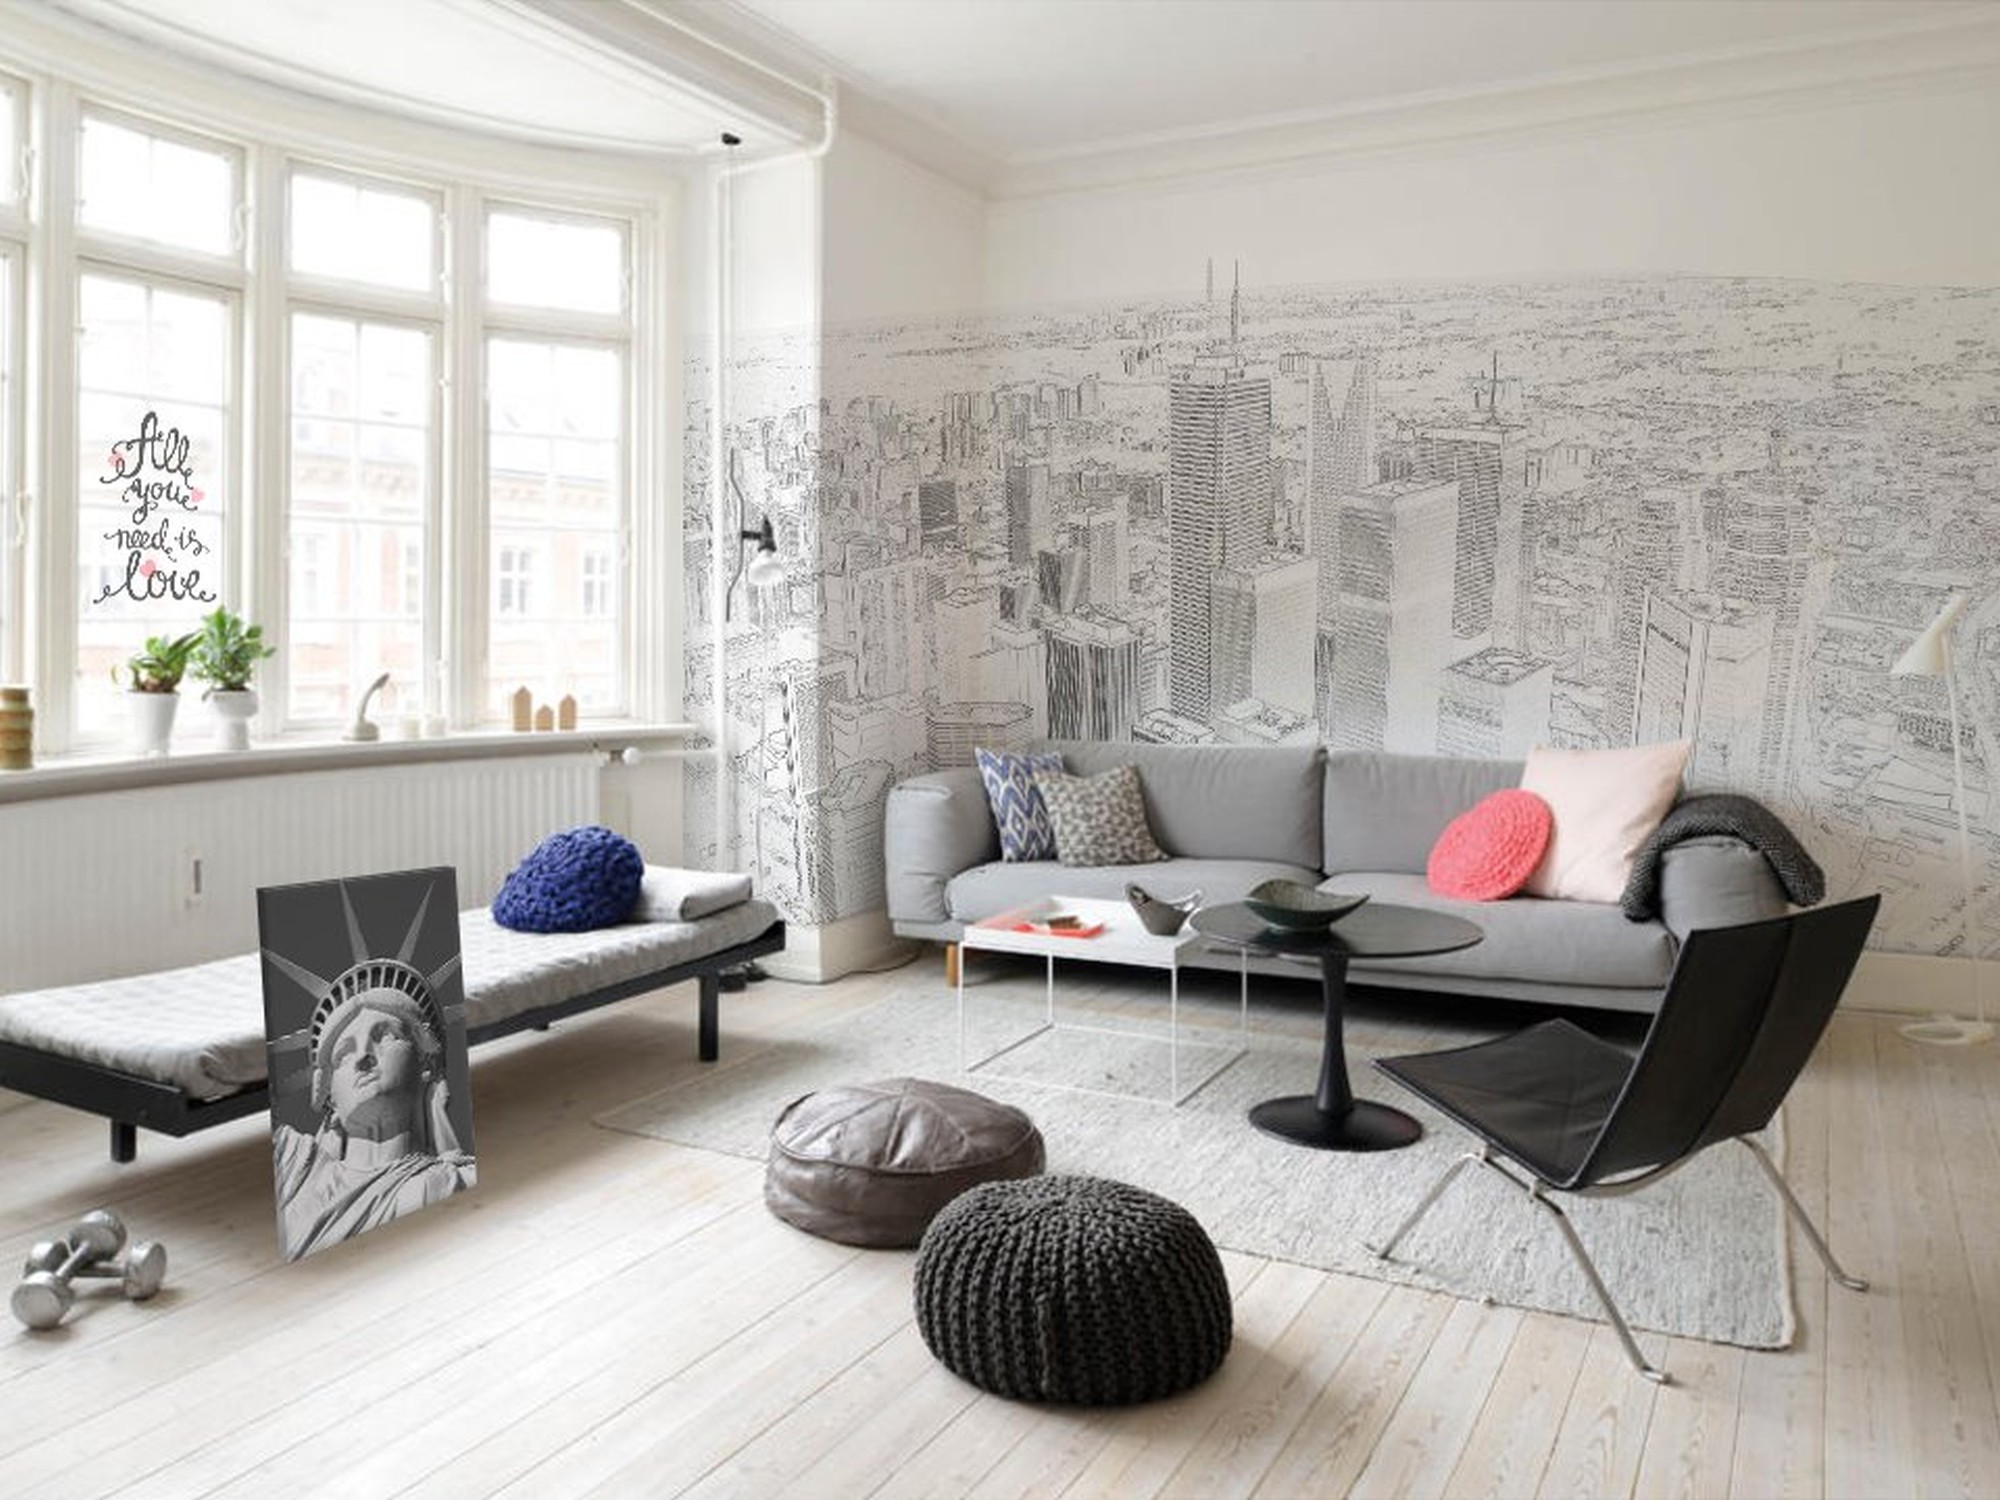 Statue Of Liberty • Scandinavian - Living room - Architecture and buildings - Wall Murals - Prints - Stickers